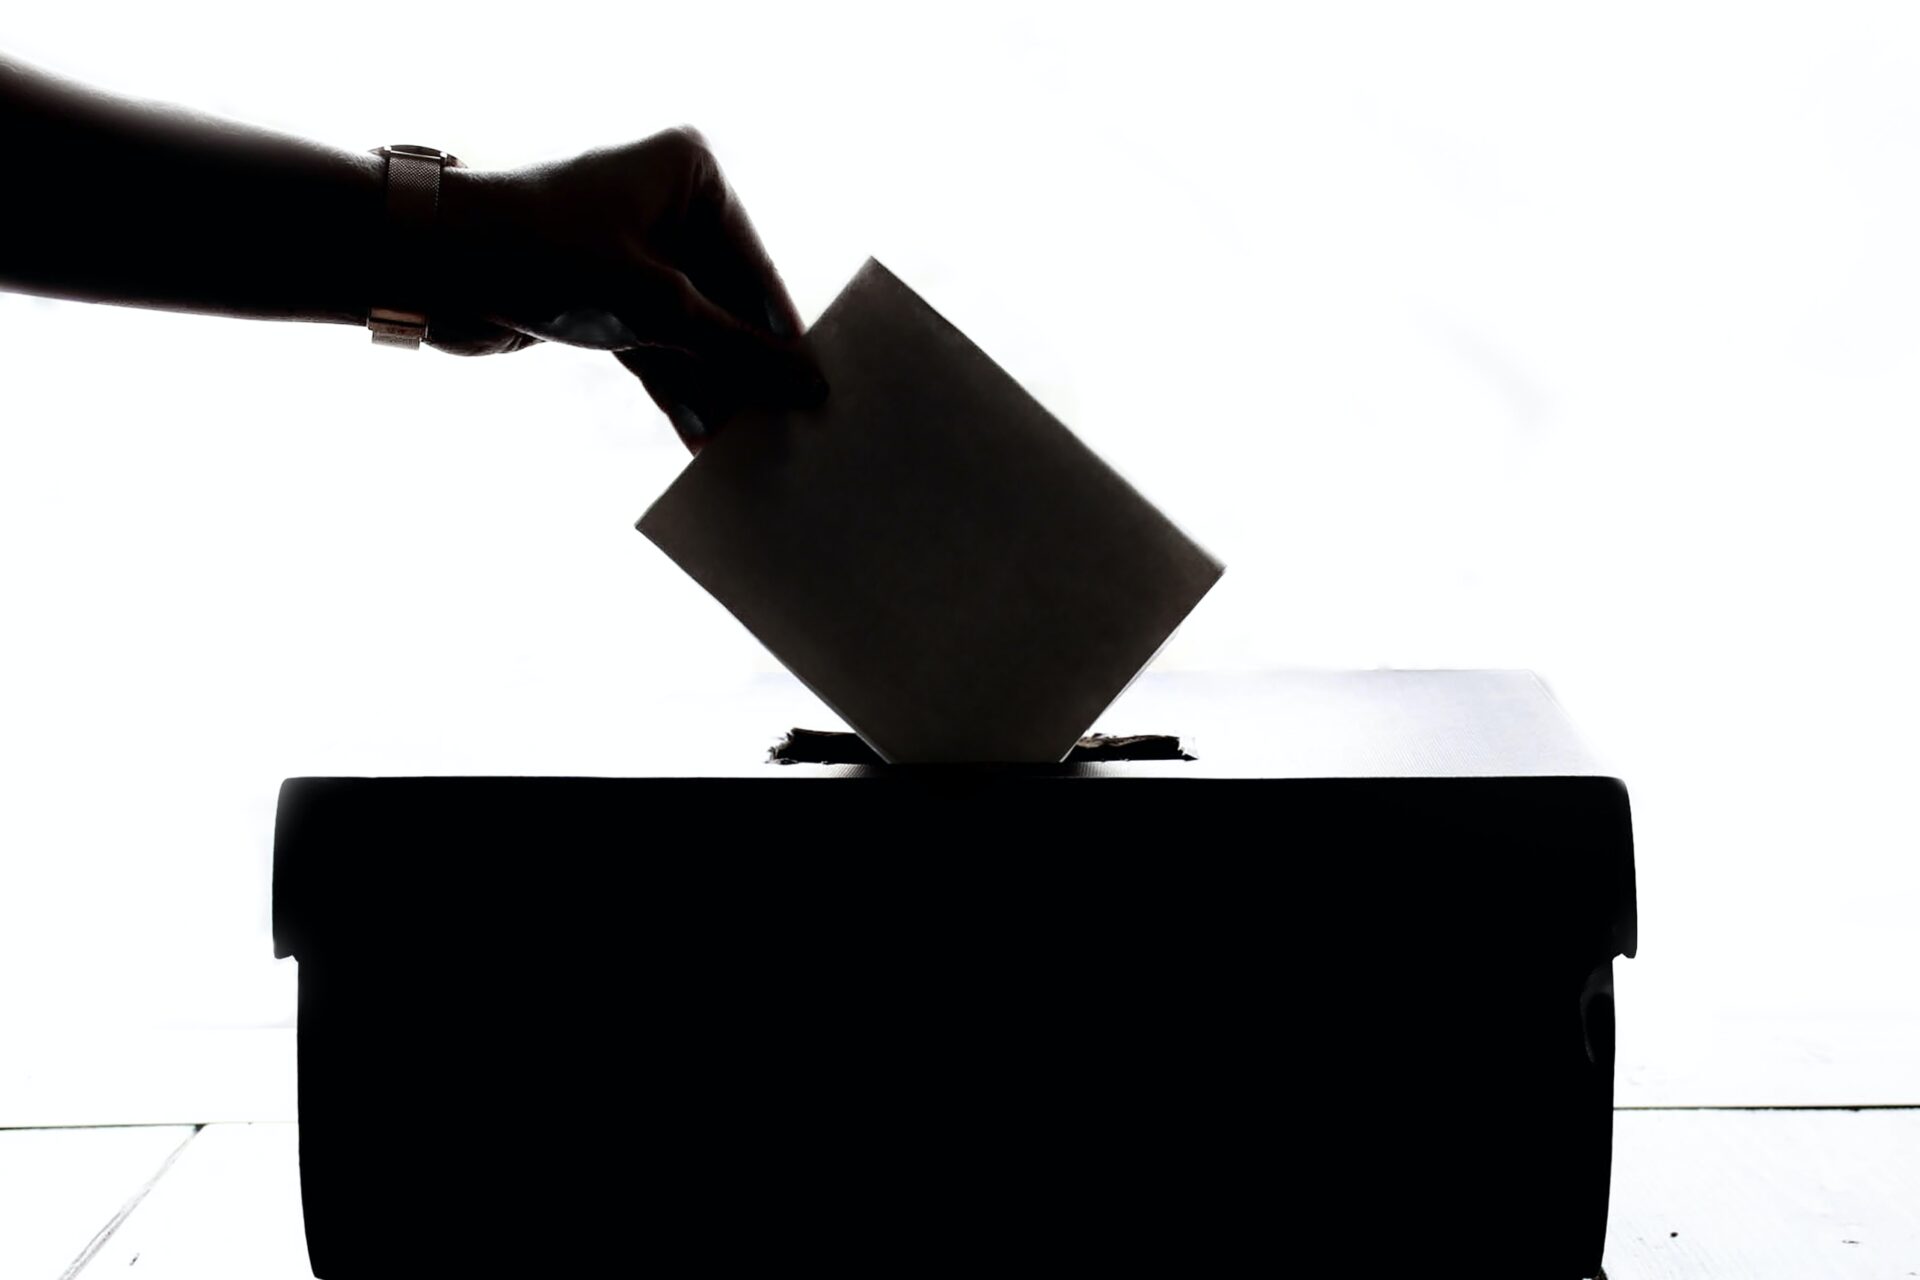 black and white images of a hand putting an envelope into a voting box